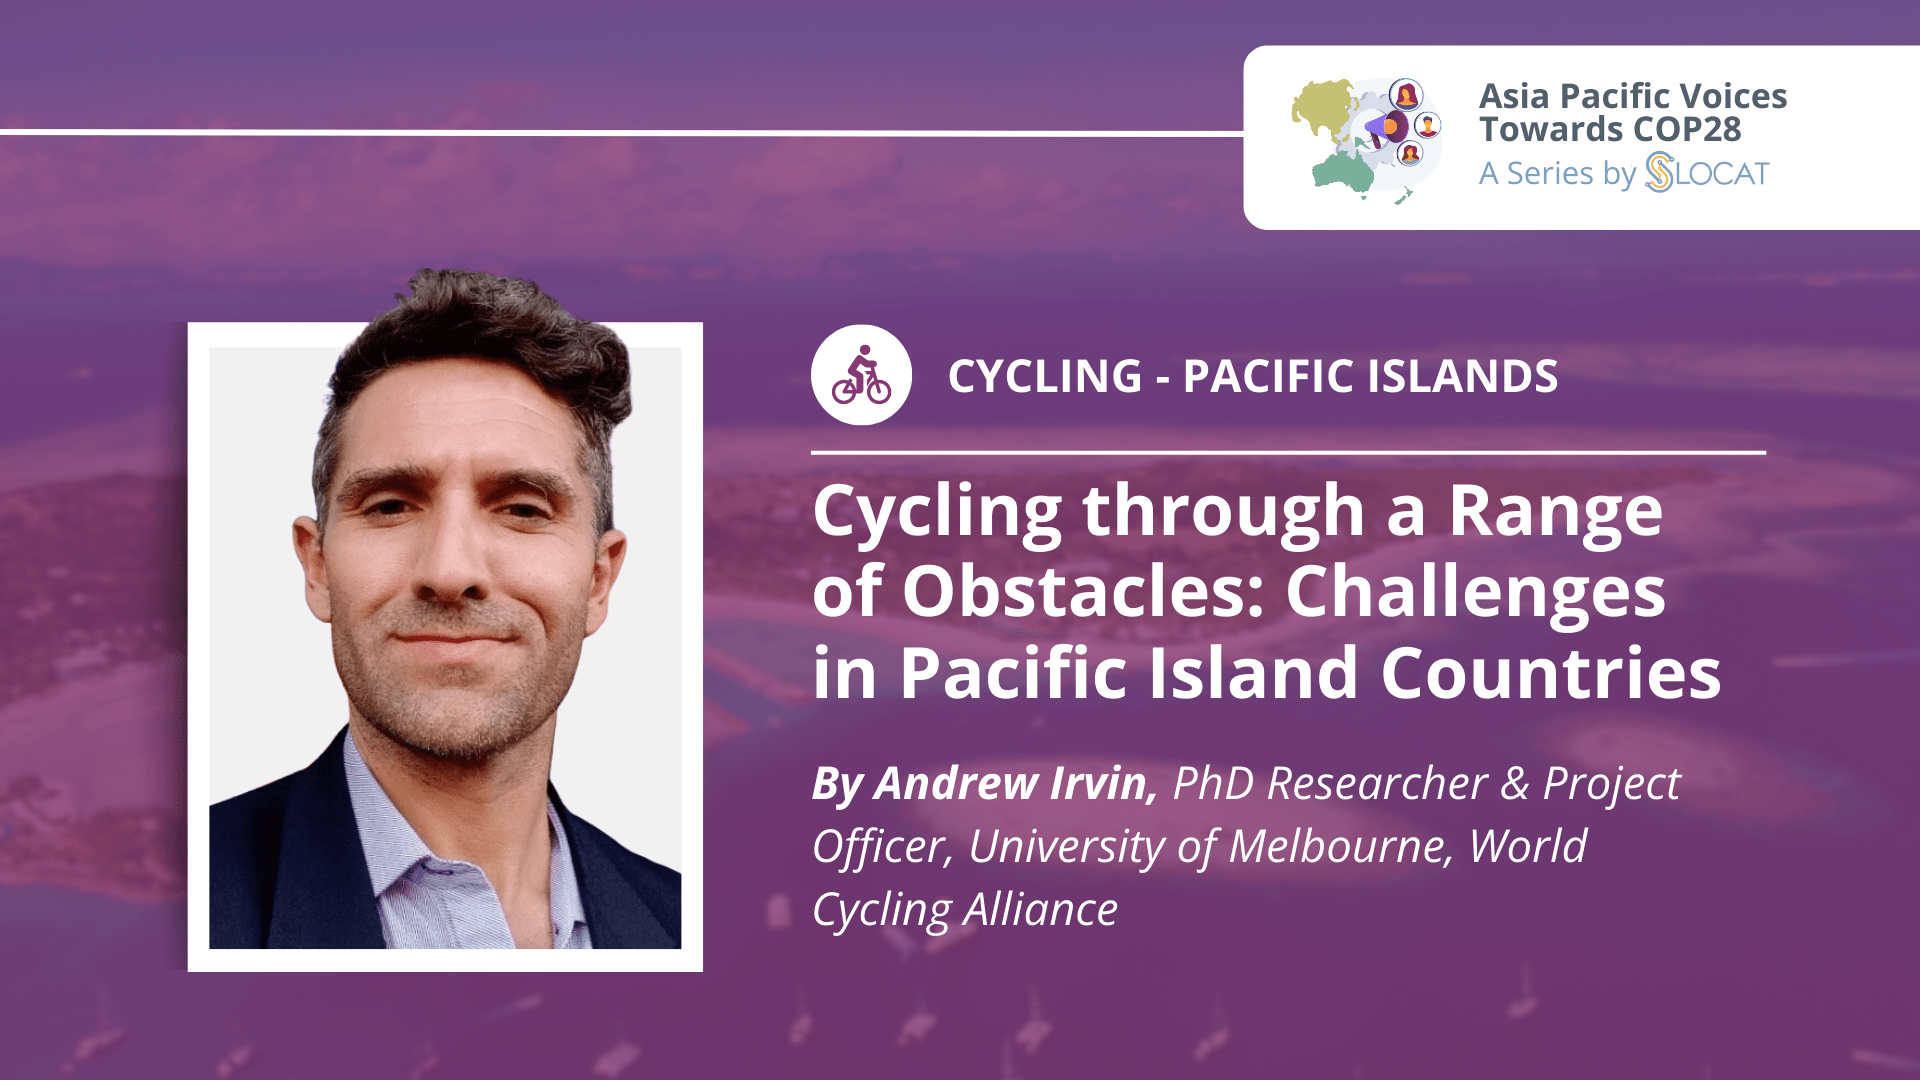 Cycling through a Range of Obstacles: Challenges in Pacific Island Countries